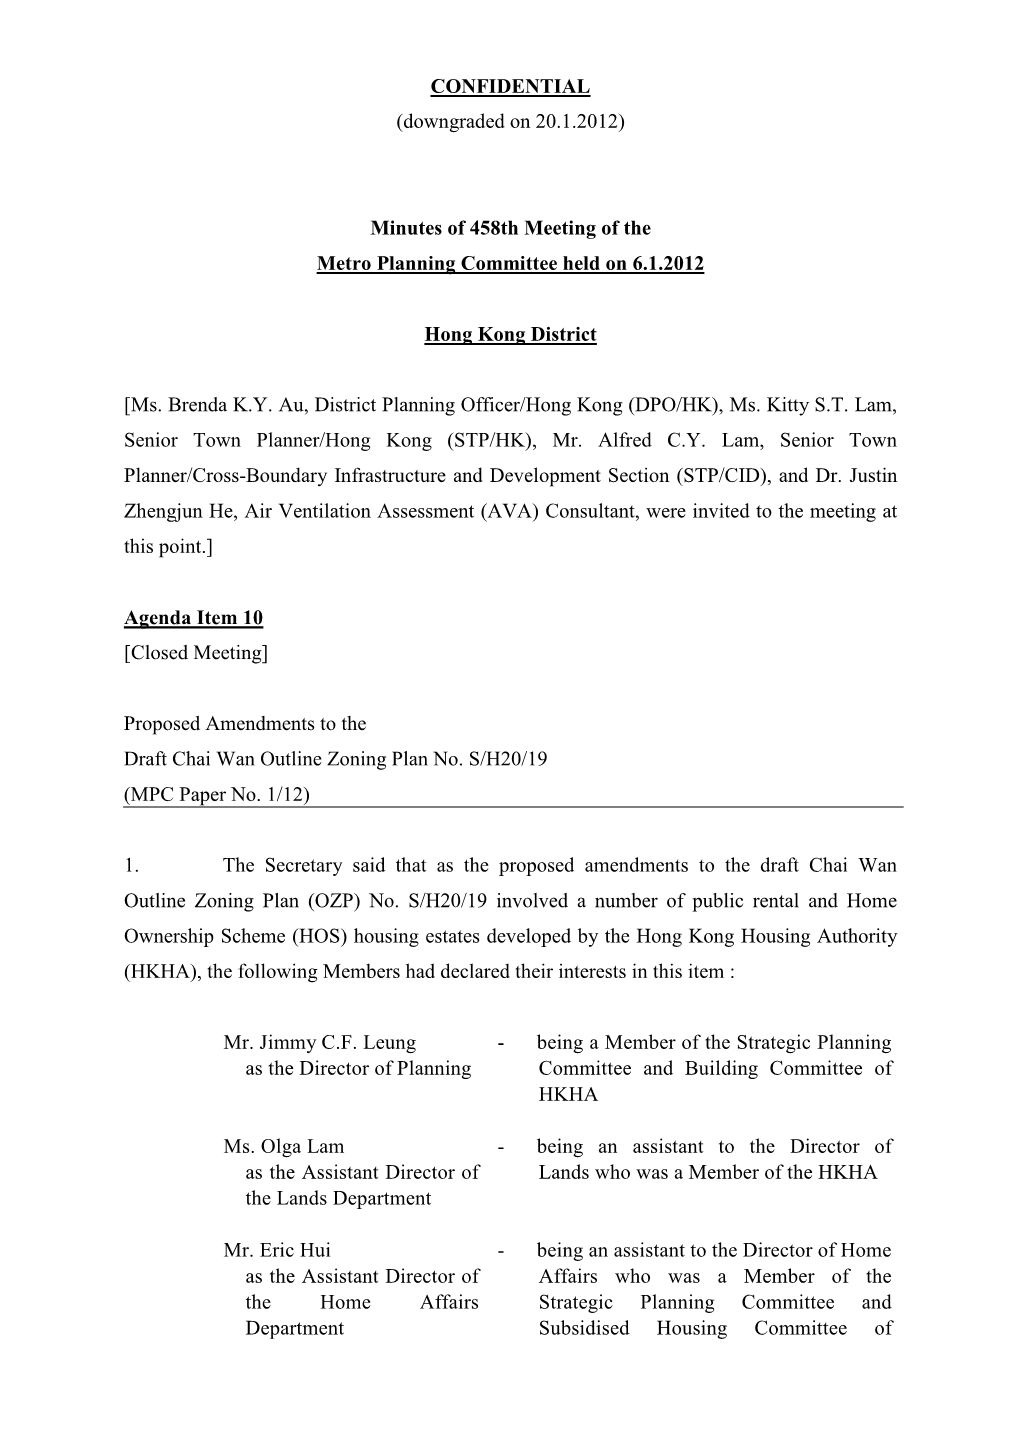 Minutes of 458Th Meeting of the Metro Planning Committee Held on 6.1.2012